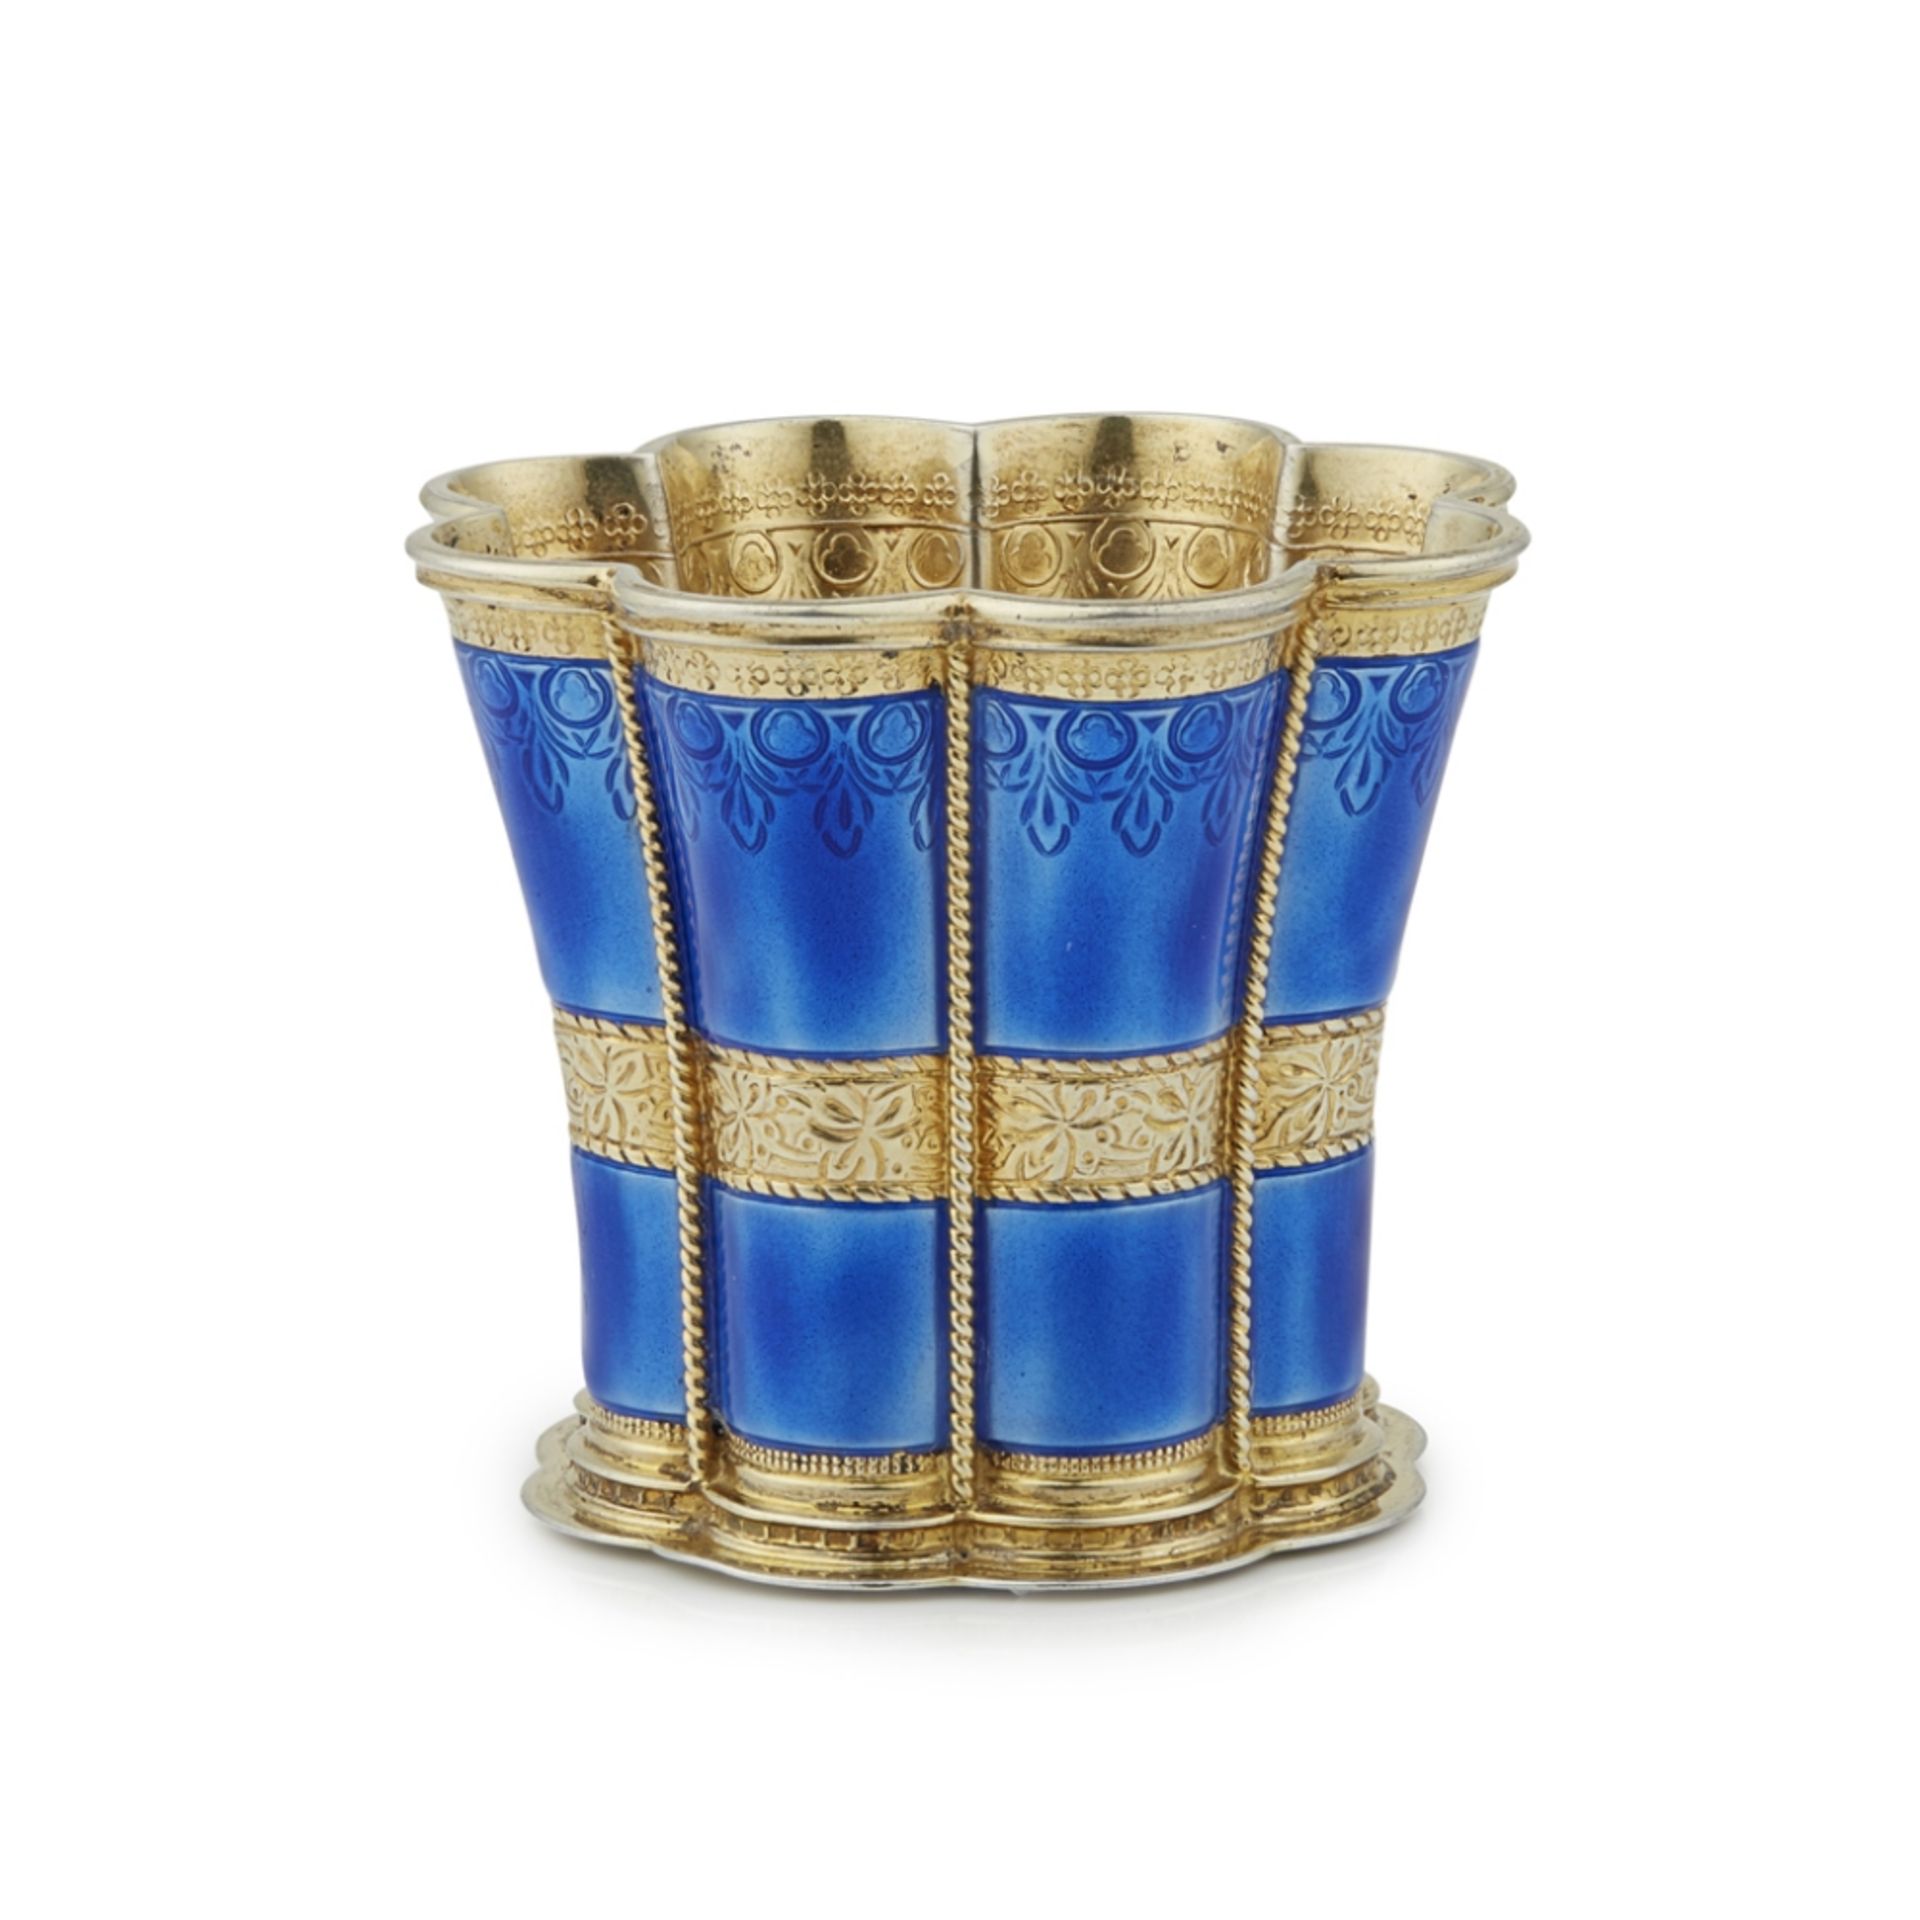 ANTON MICHELSEN (1809-77) STERLING SILVER GILT AND ENAMEL REPLICA OF QUEEN MARGRETHE'S CUP, CIRCA